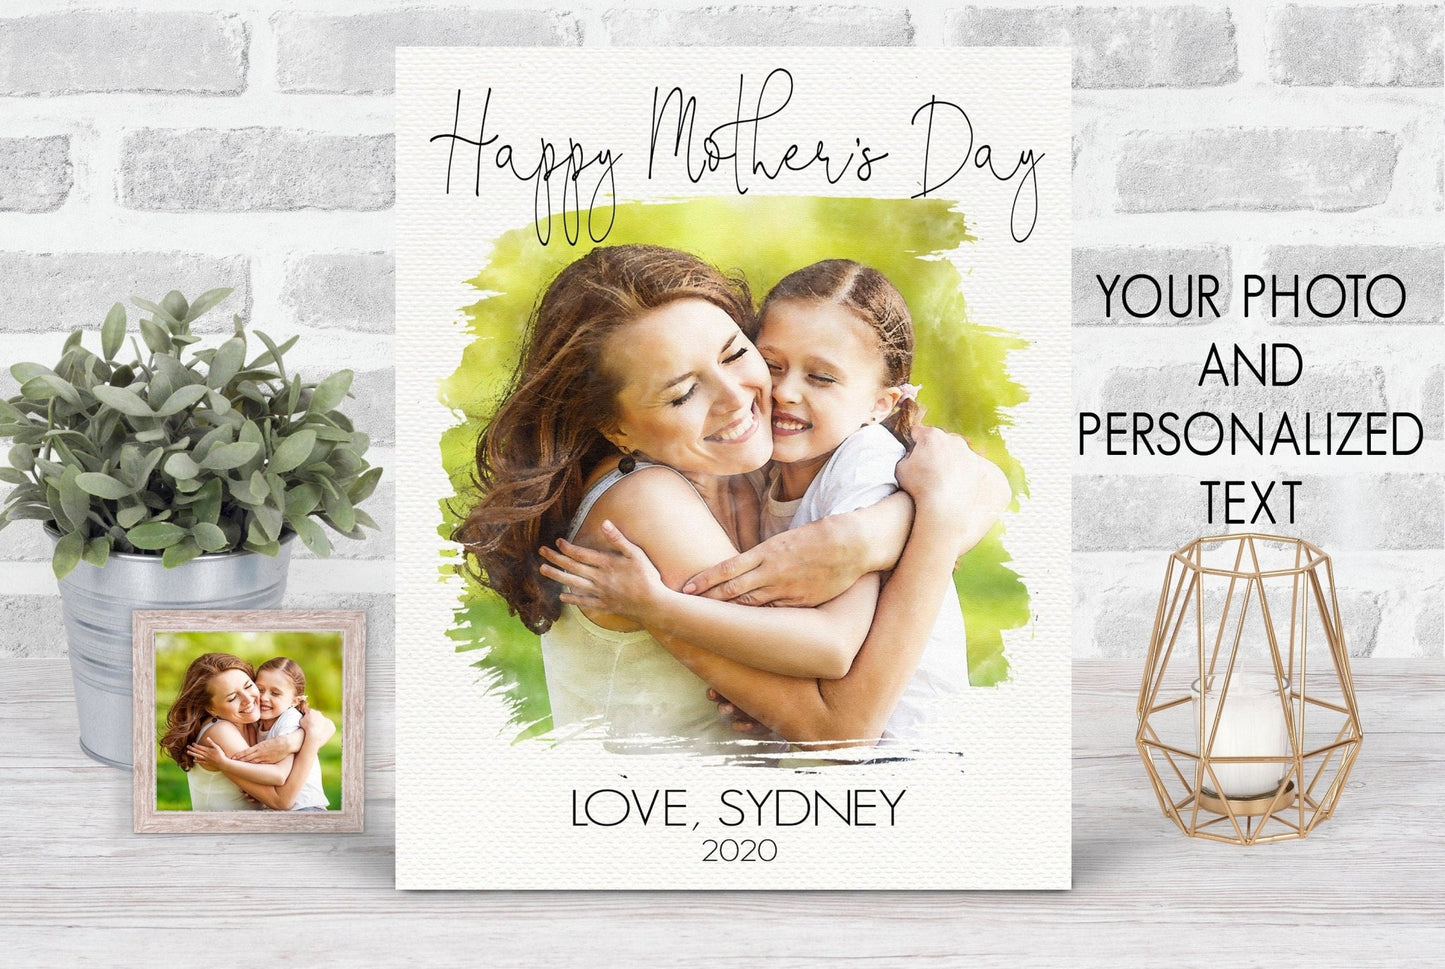 Personalized Happy Mother's Day Photo Wall Art - Squishy Cheeks